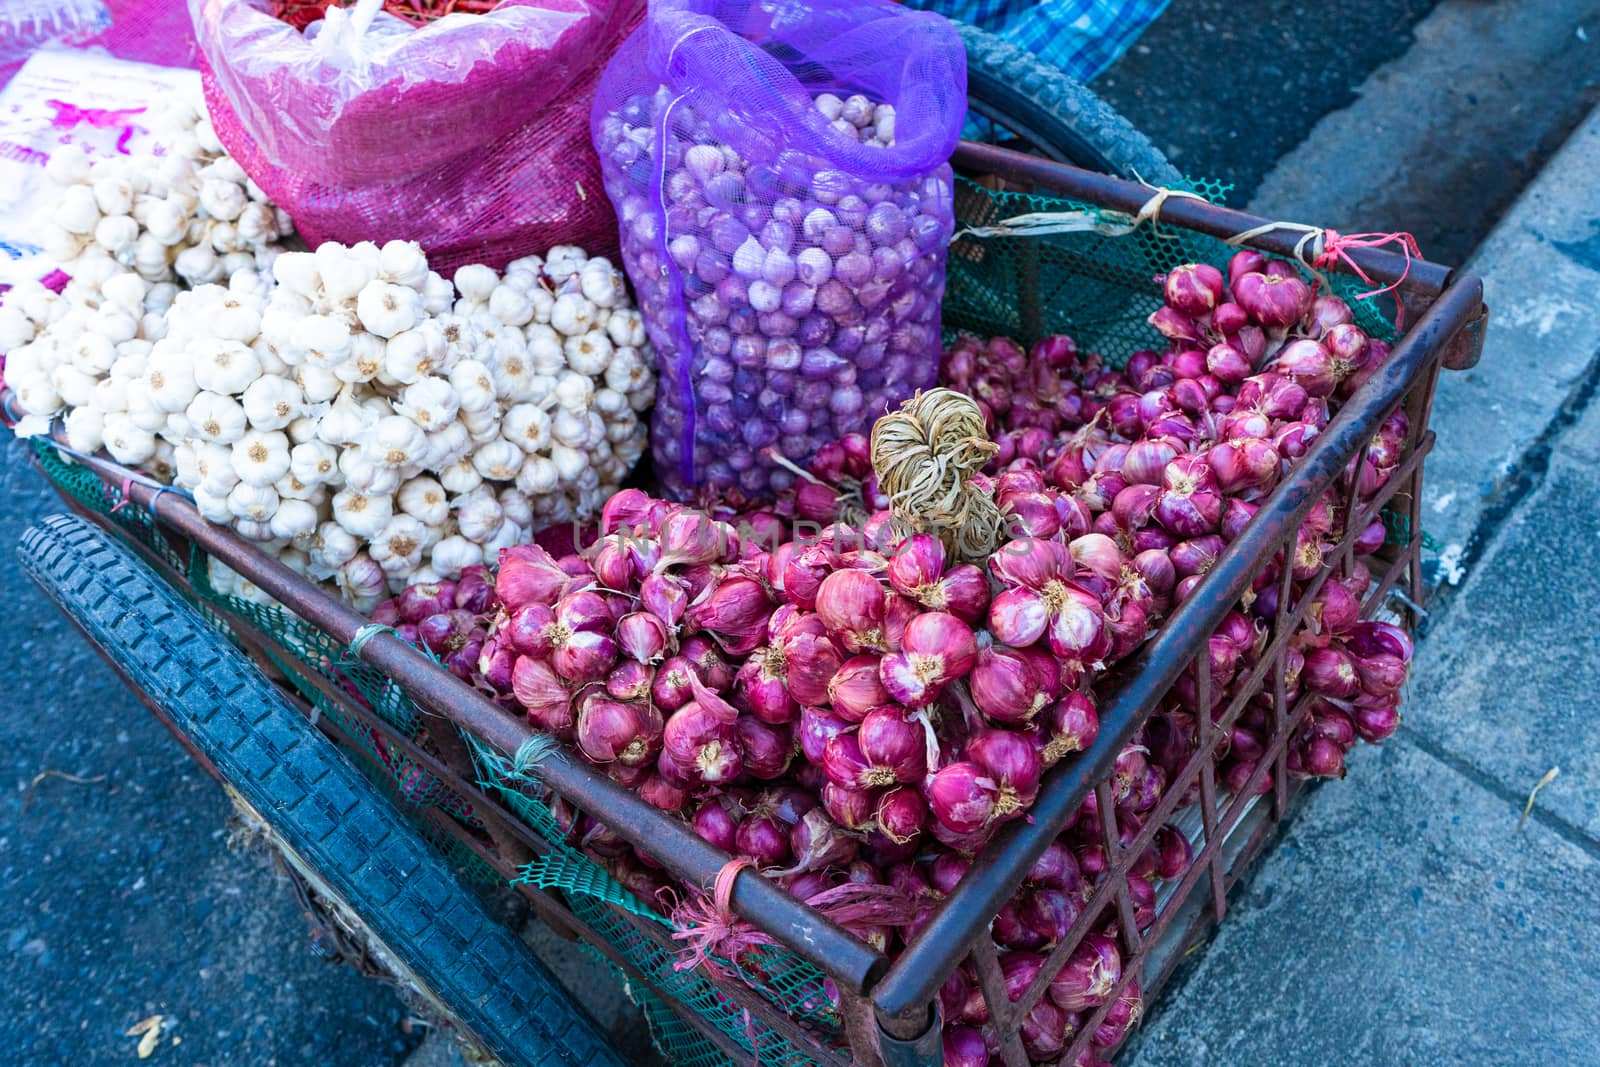 Asian street vendor sells seasonings, onions, garlic and peppers on a cart on the street